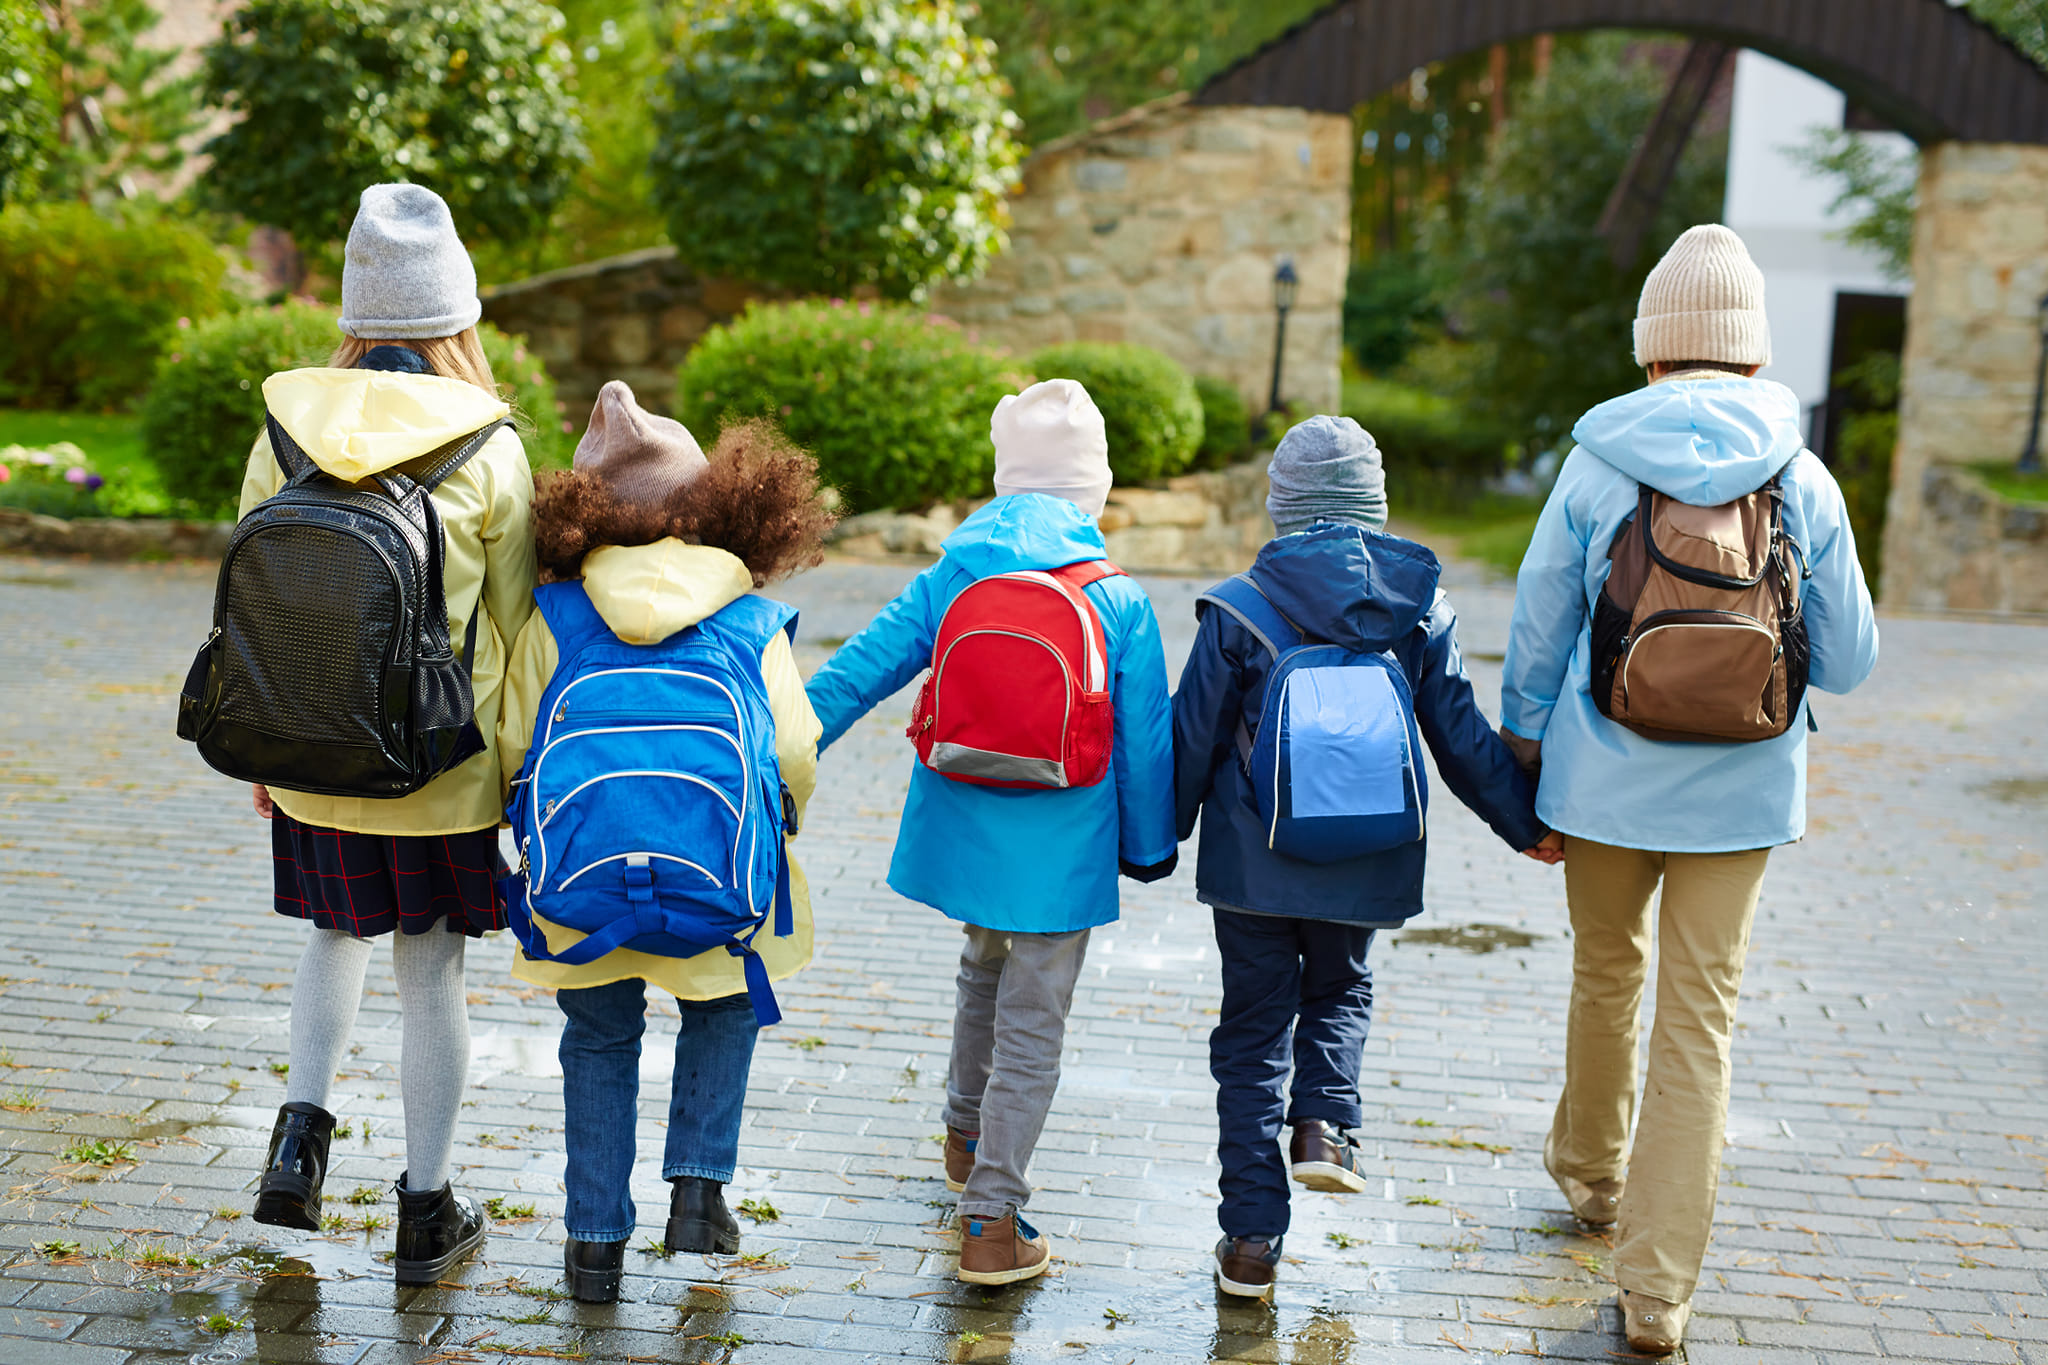 Schoolkids in casualwear with rucksacks behind backs holding by hands while going to school